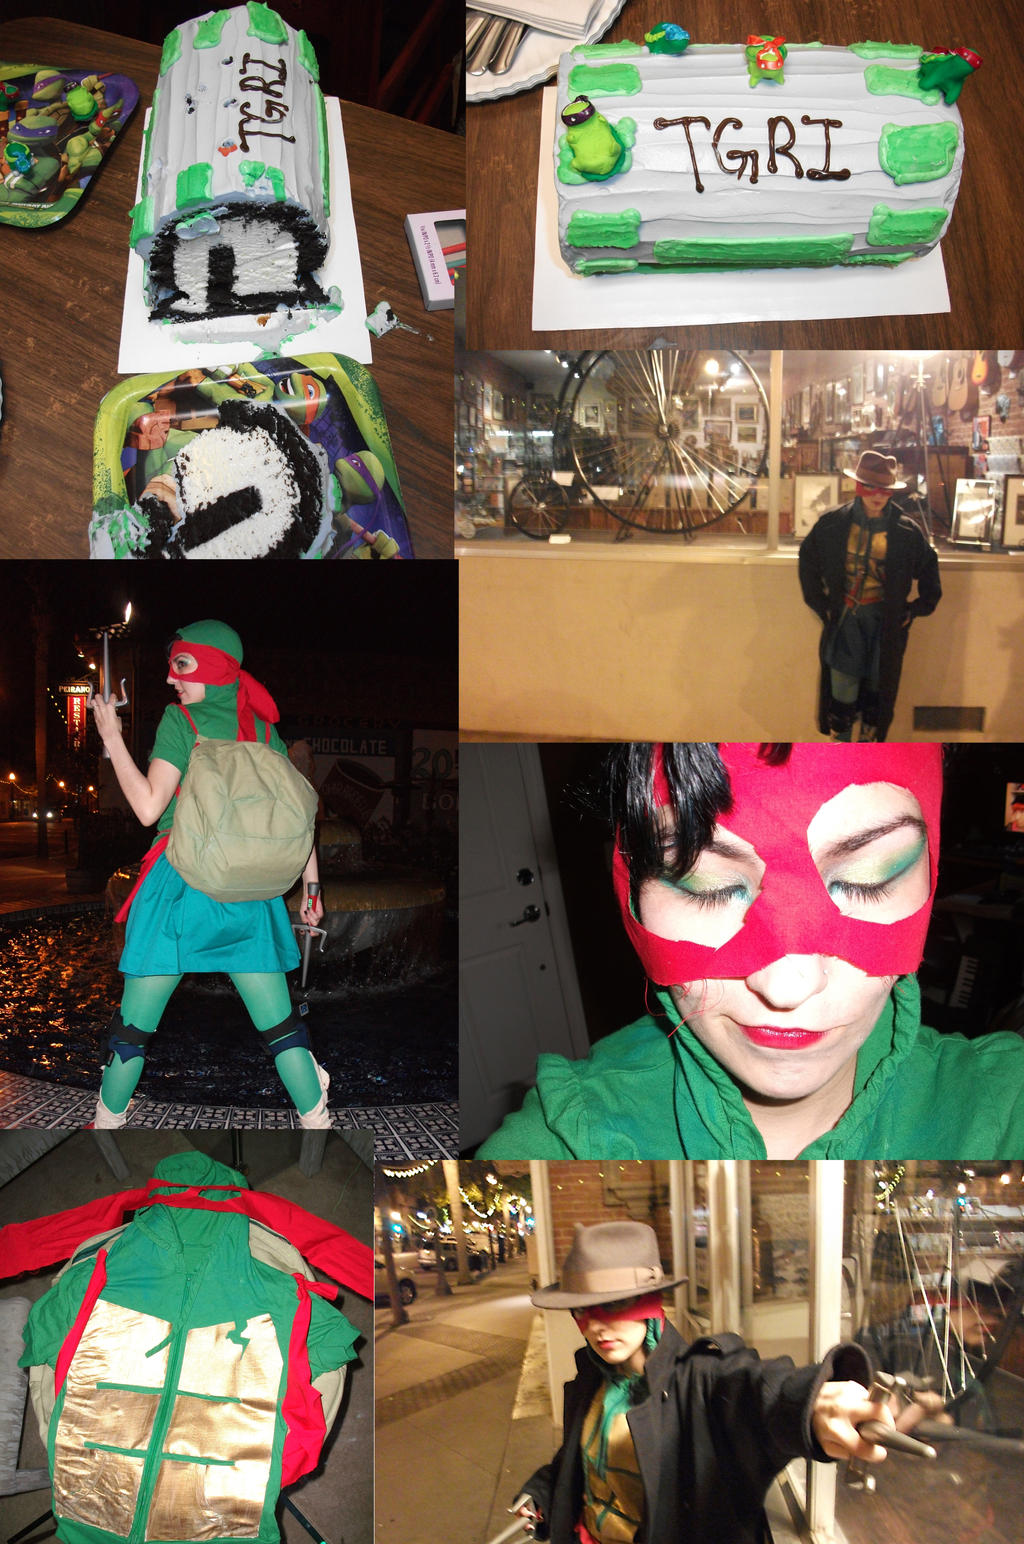 TMNT costume for pizza birthday party